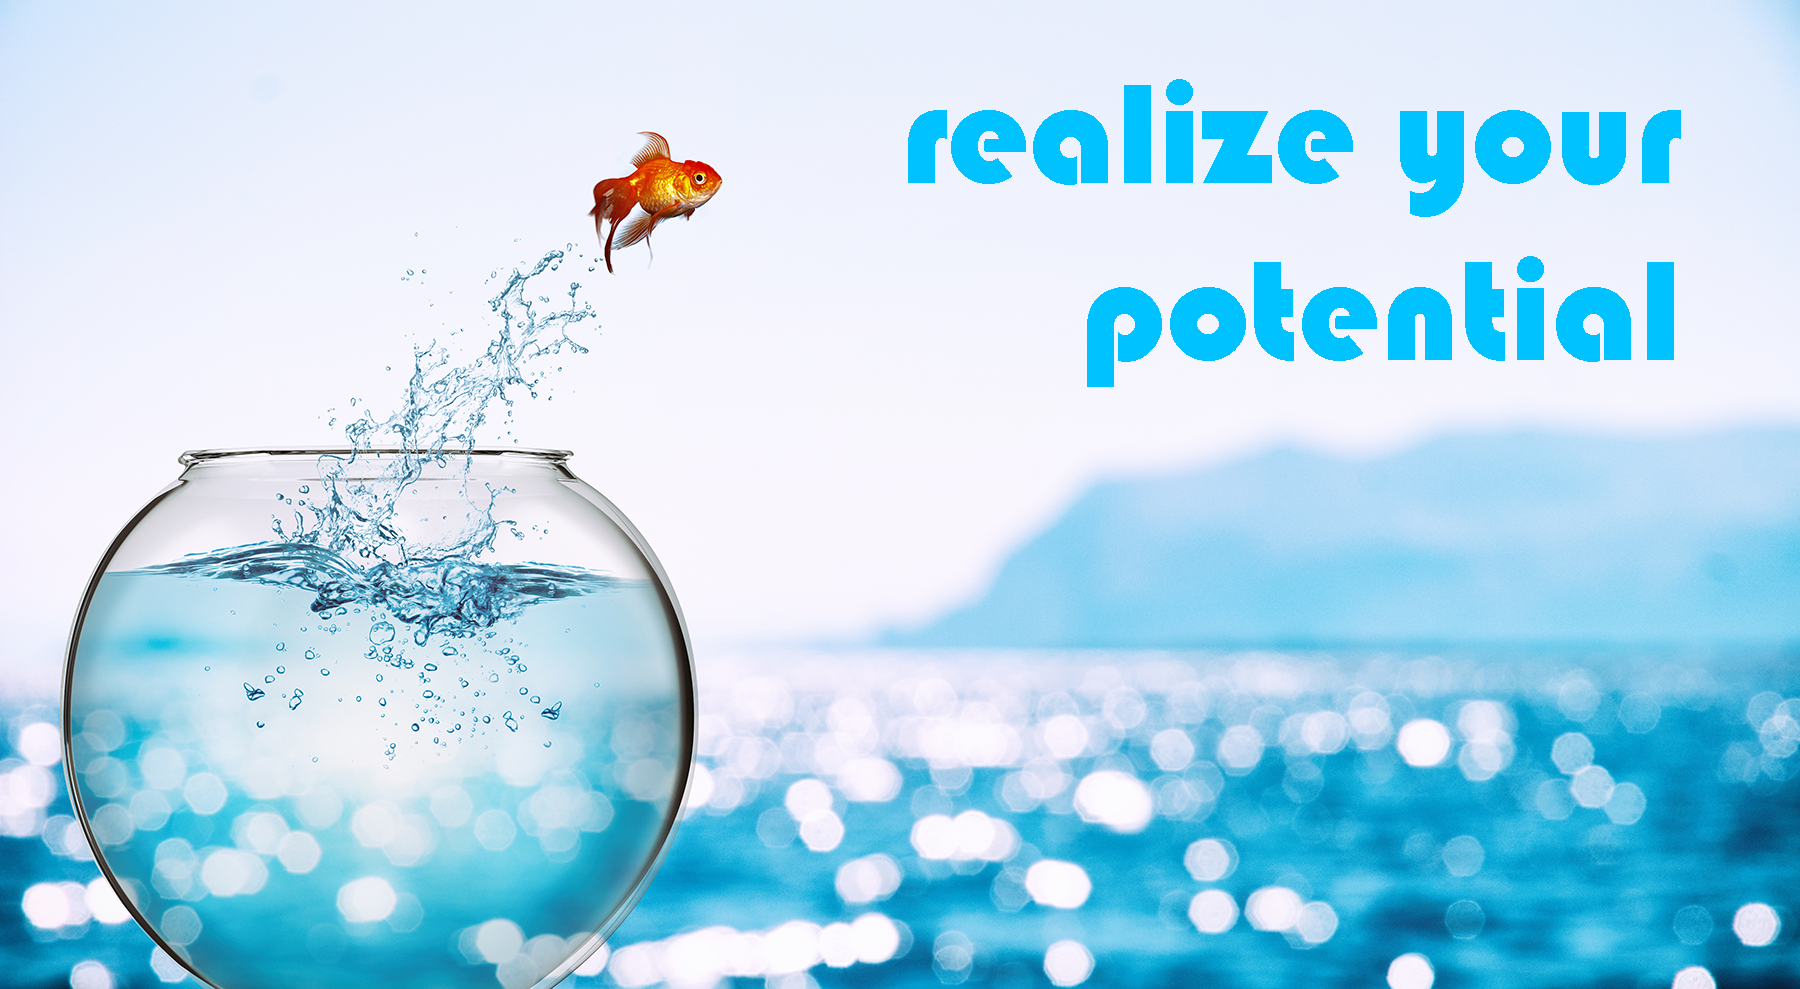 Realize your potential